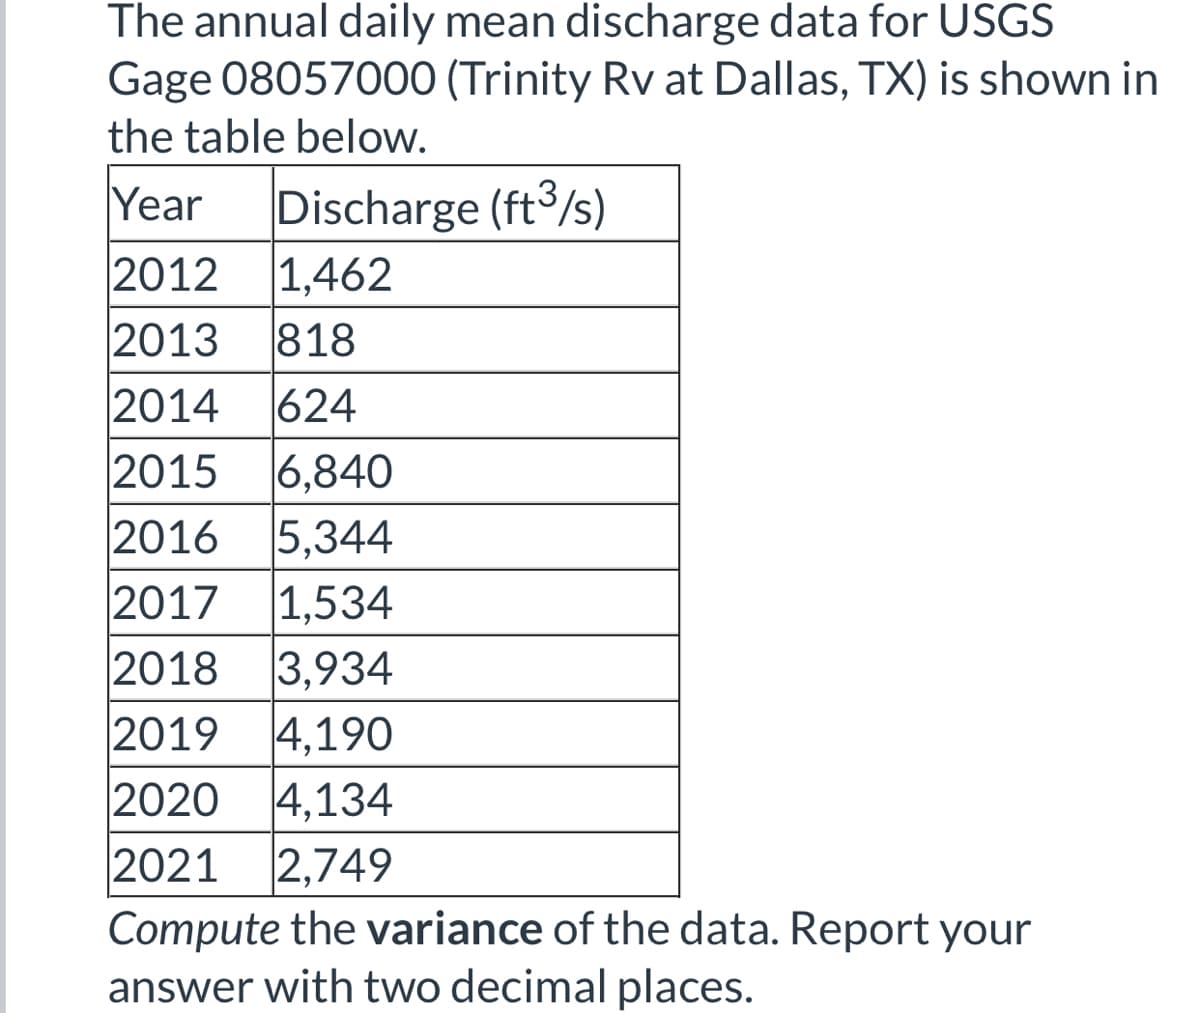 The annual daily mean discharge data for USGS
08057000 (Trinity Rv at Dallas, TX) is shown in
the table below.
Gage
Year Discharge (ft3/s)
2012 1,462
2013 818
2014 624
2015 6,840
2016 5,344
2017 1,534
2018 3,934
2019 4,190
2020 4,134
2021 2,749
Compute the variance of the data. Report your
answer with two decimal places.